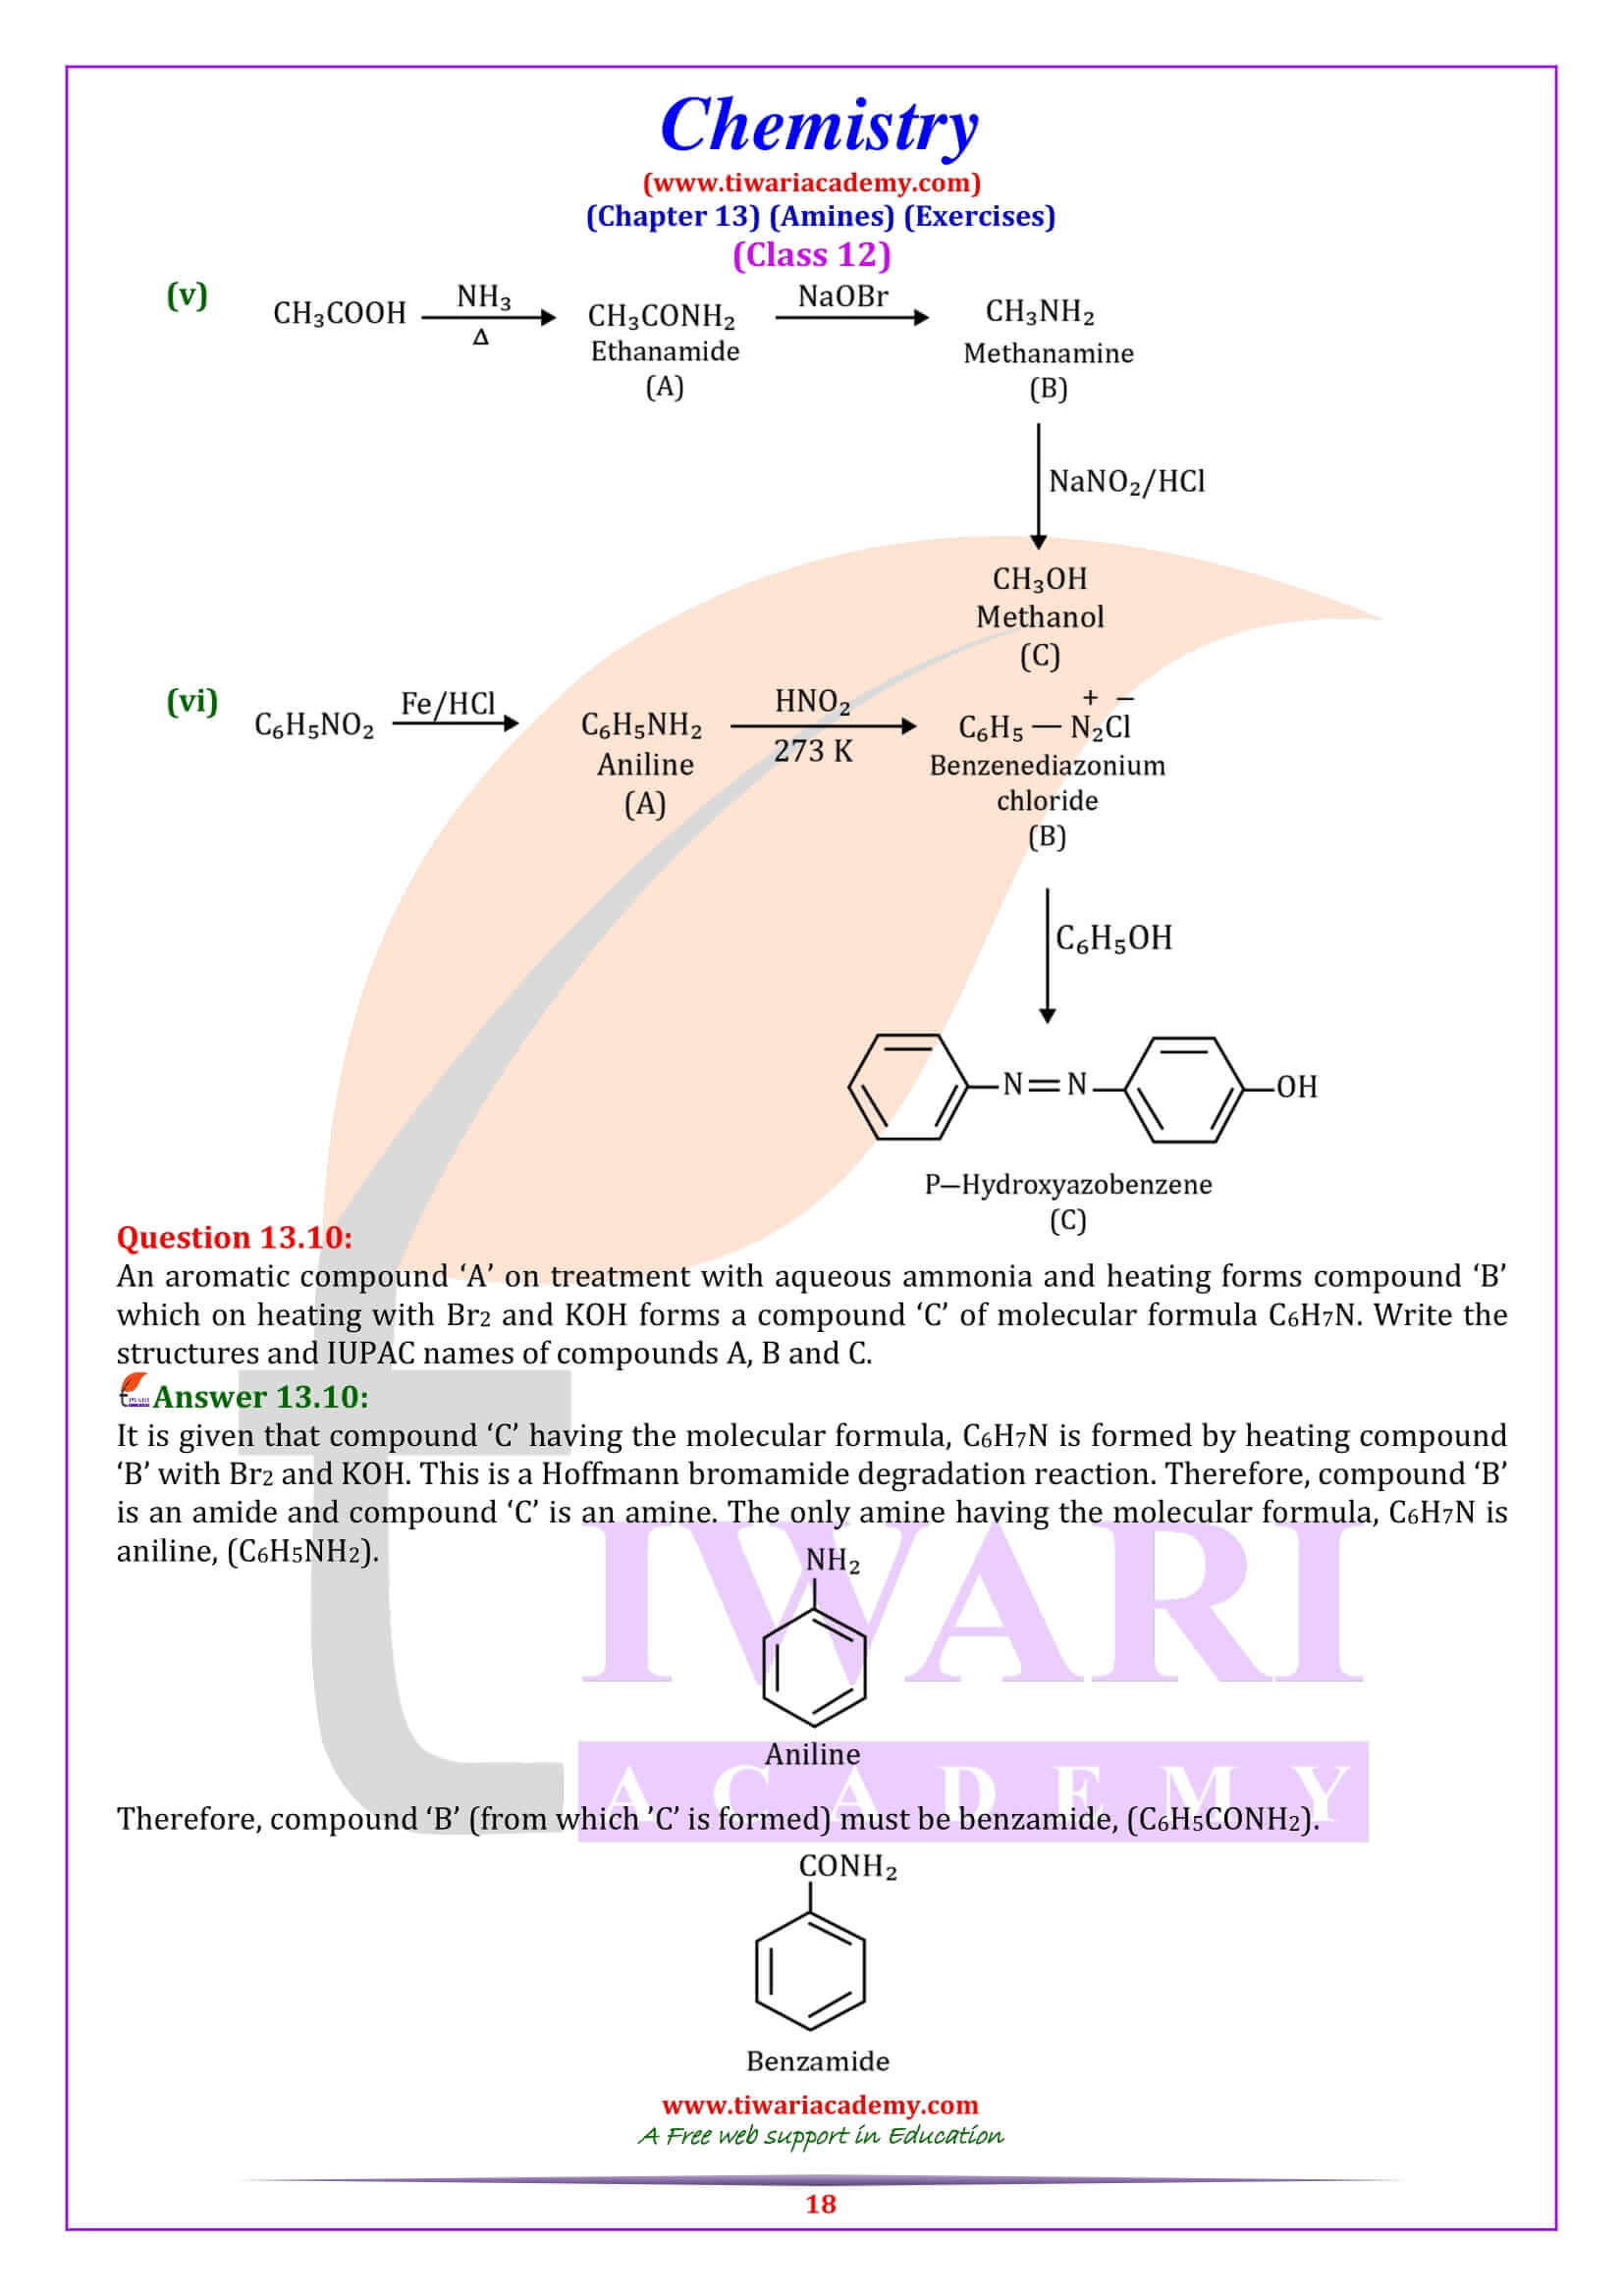 Class 12 Chemistry Chapter 13 free download